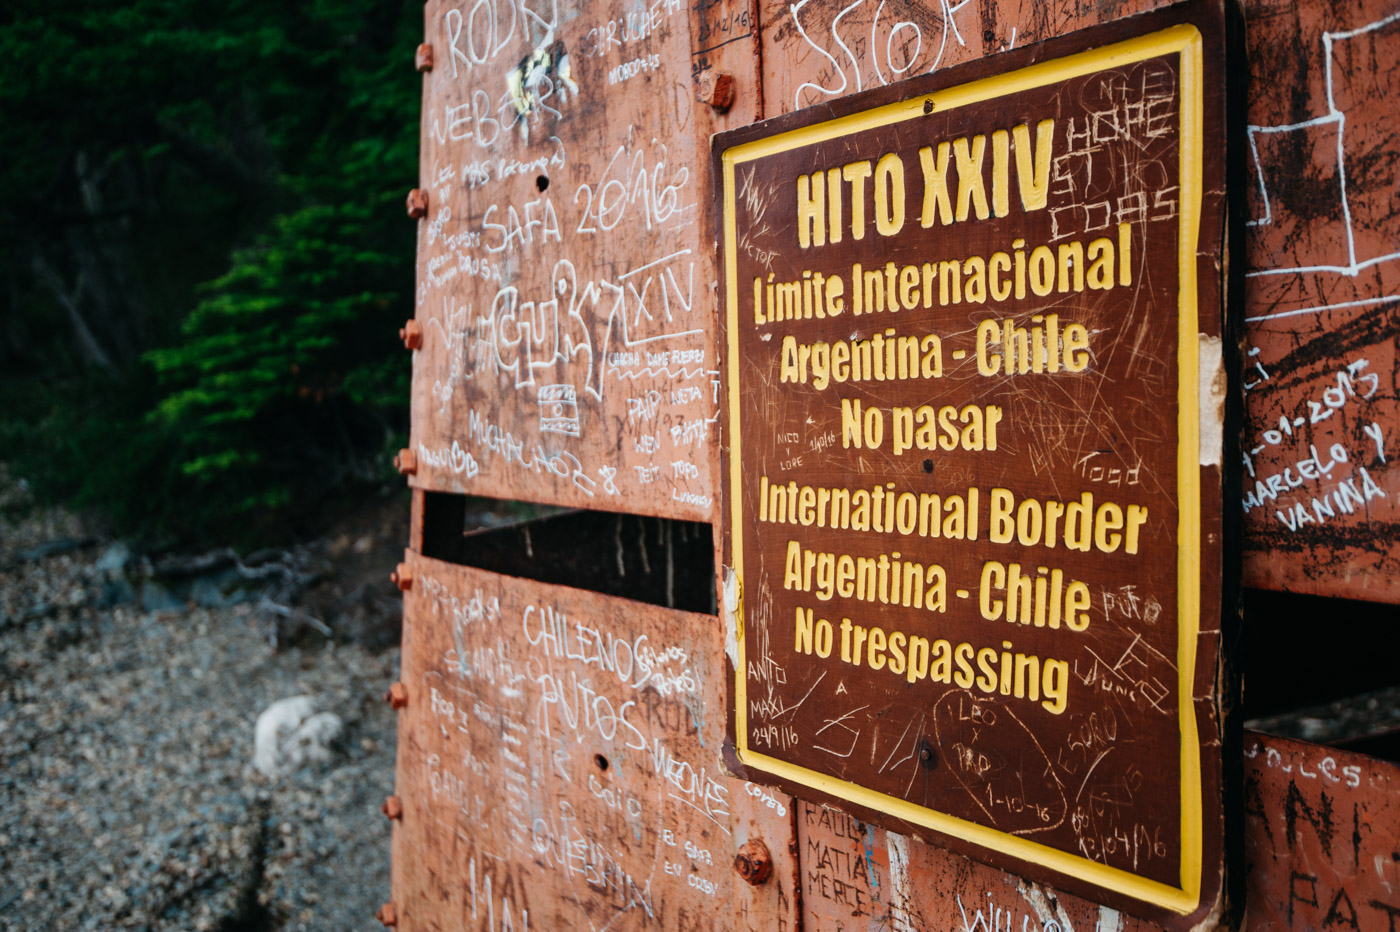 Argentina National Park Tierra del Fuego Beagle Channel HITO XXIV Border between Argentina and Chile Sign